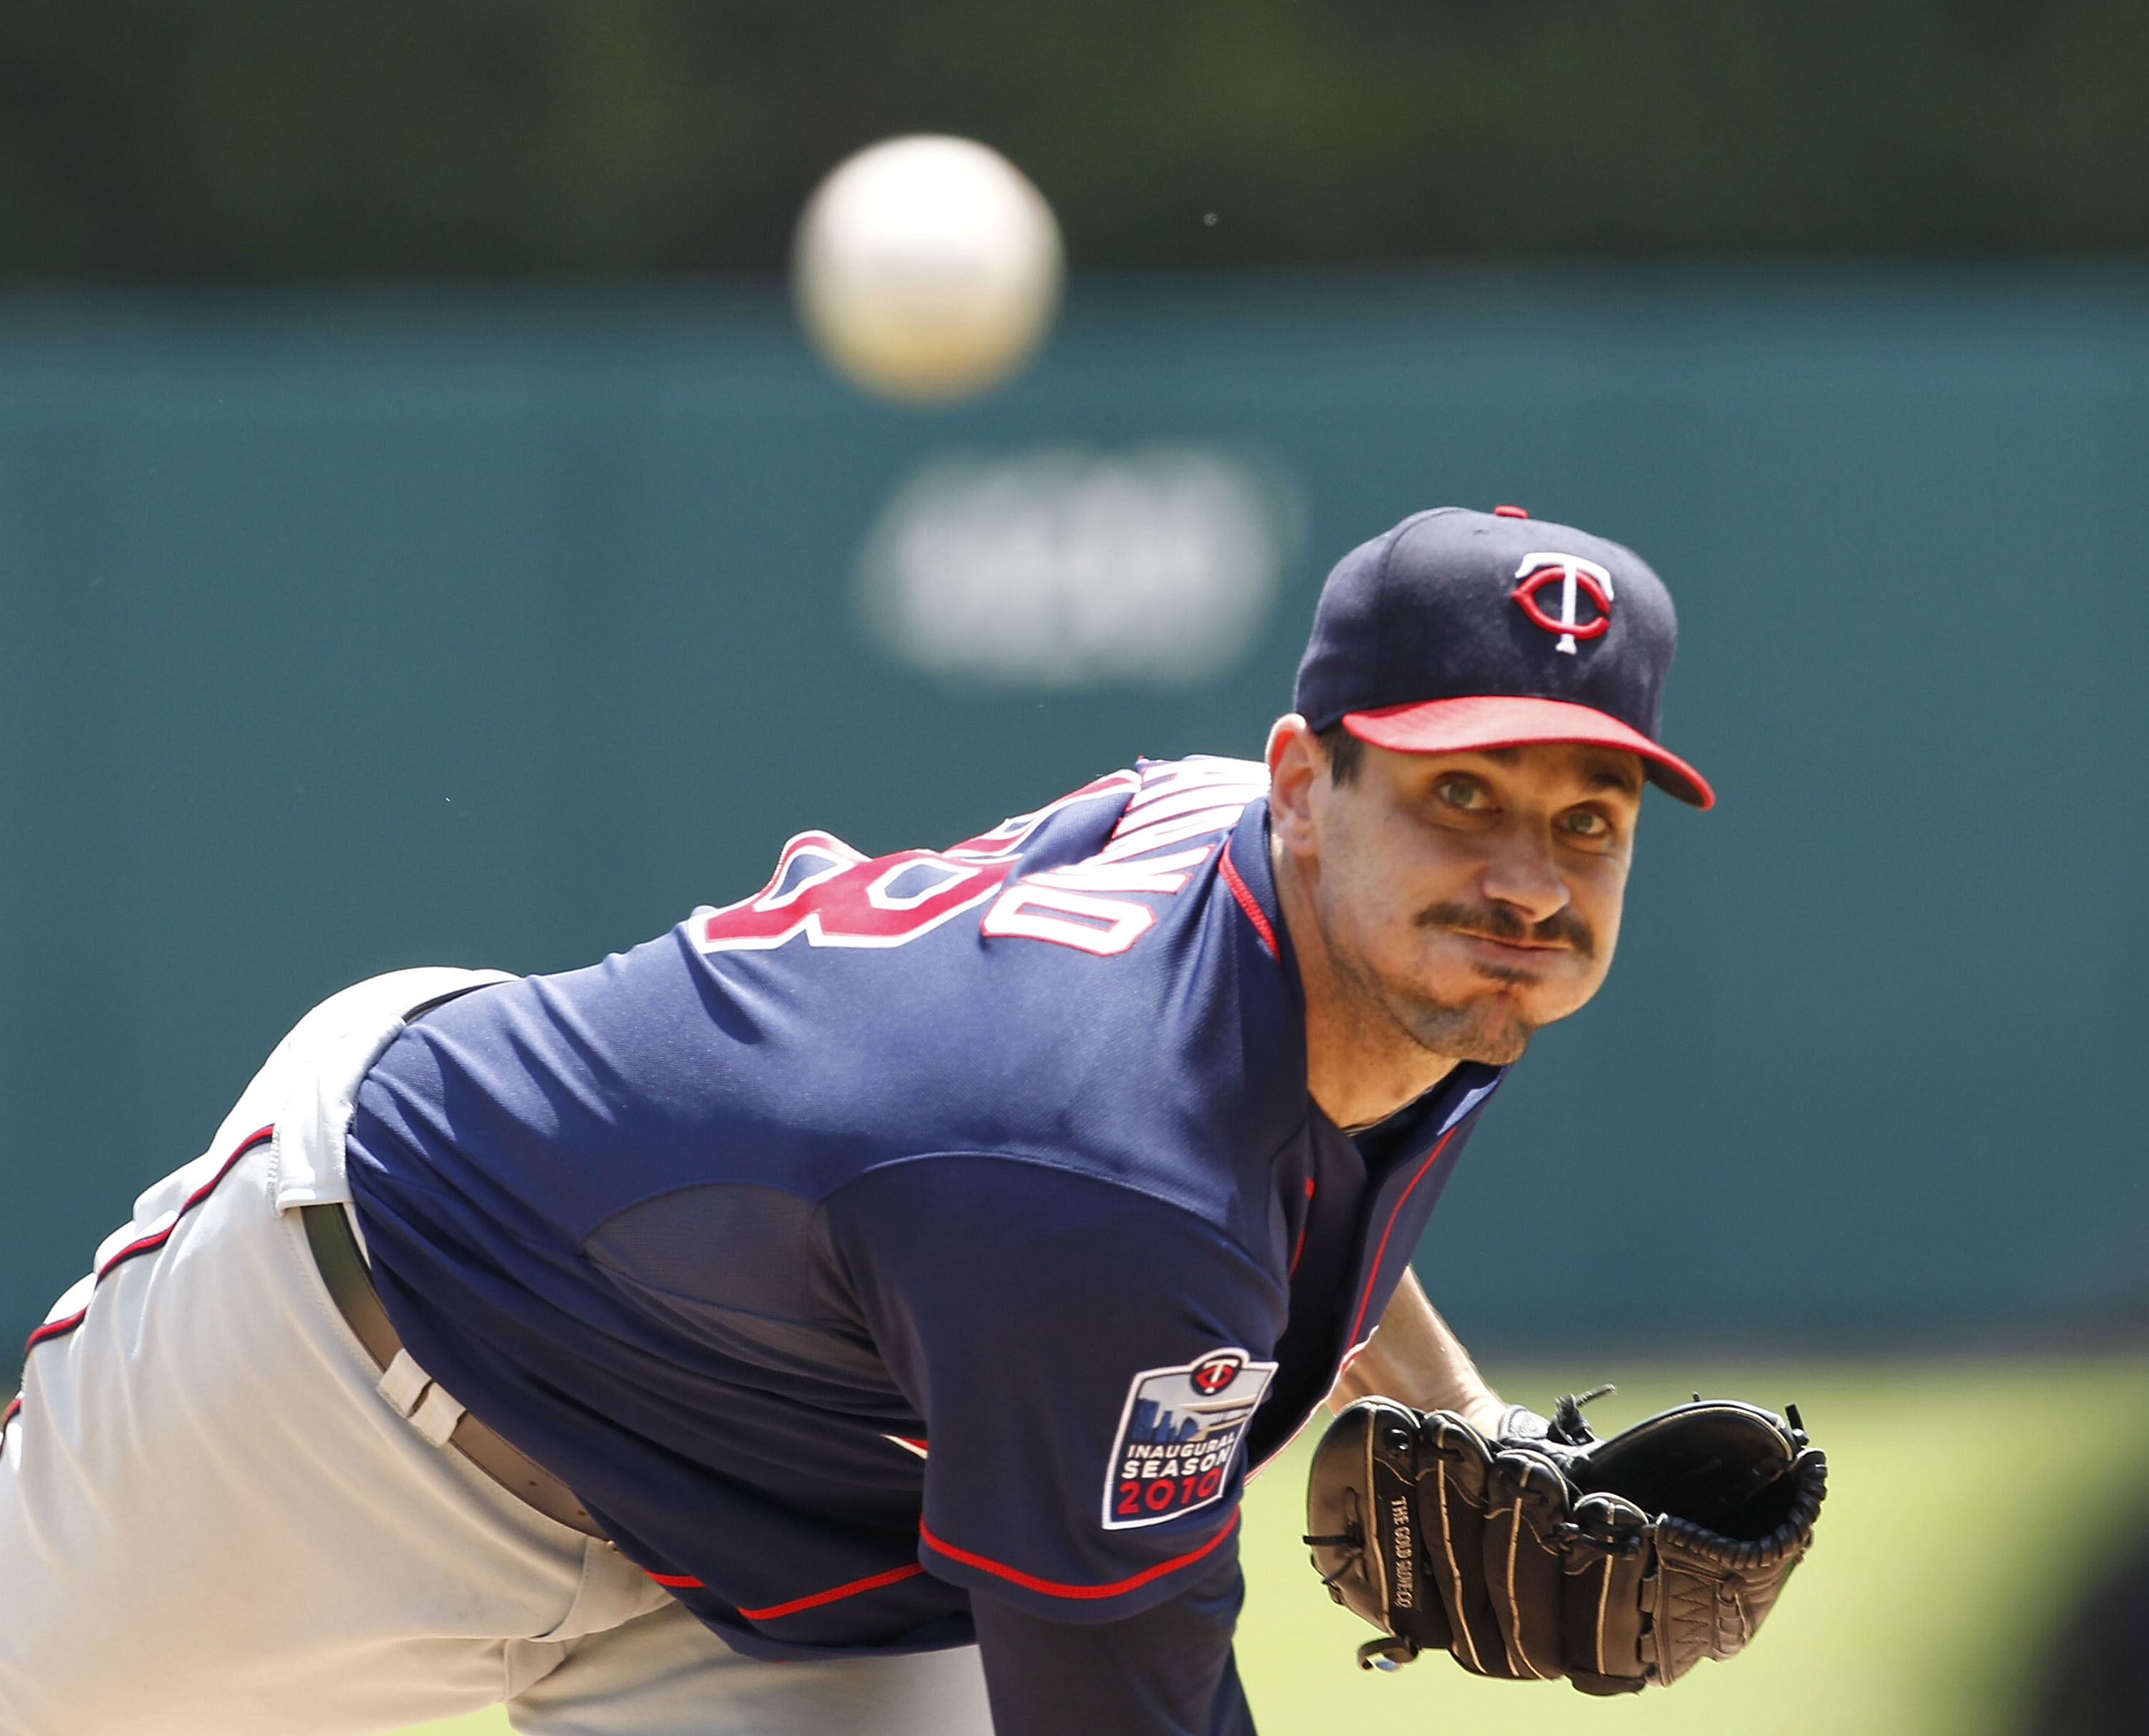 DETROIT - JULY 11:  Carl Pavano #48 of the Minnesota Twins warms up prior to the start of the game against the Detroit Tigers on July 11, 2010 at Comerica Park in Detroit, Michigan.  (Photo by Leon Halip/Getty Images)